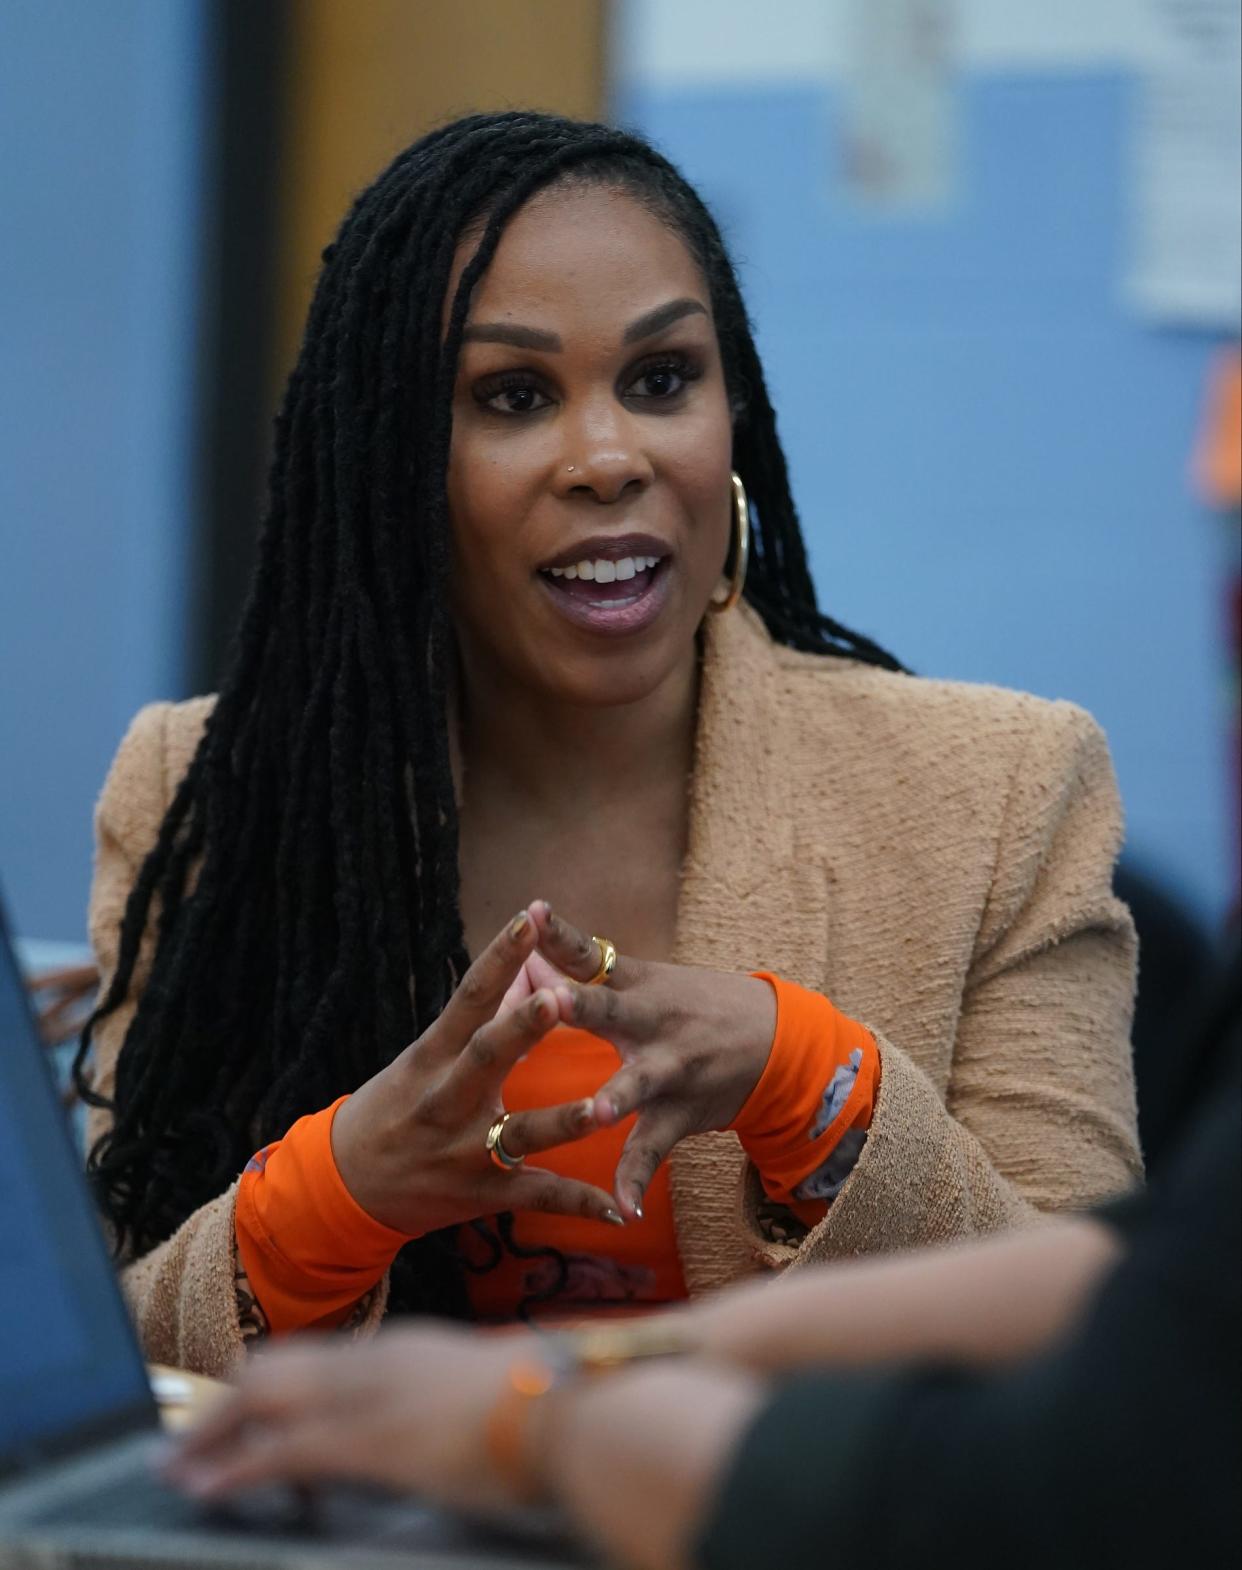 Dr. Uché Blackstone, founder and CEO of Advancing Health Equity, engaging with healthcare and related organizations around bias and racism in healthcare, speaks during an event at the Grinton I. Will Library in Yonkers on Saturday, April 20, 2024.